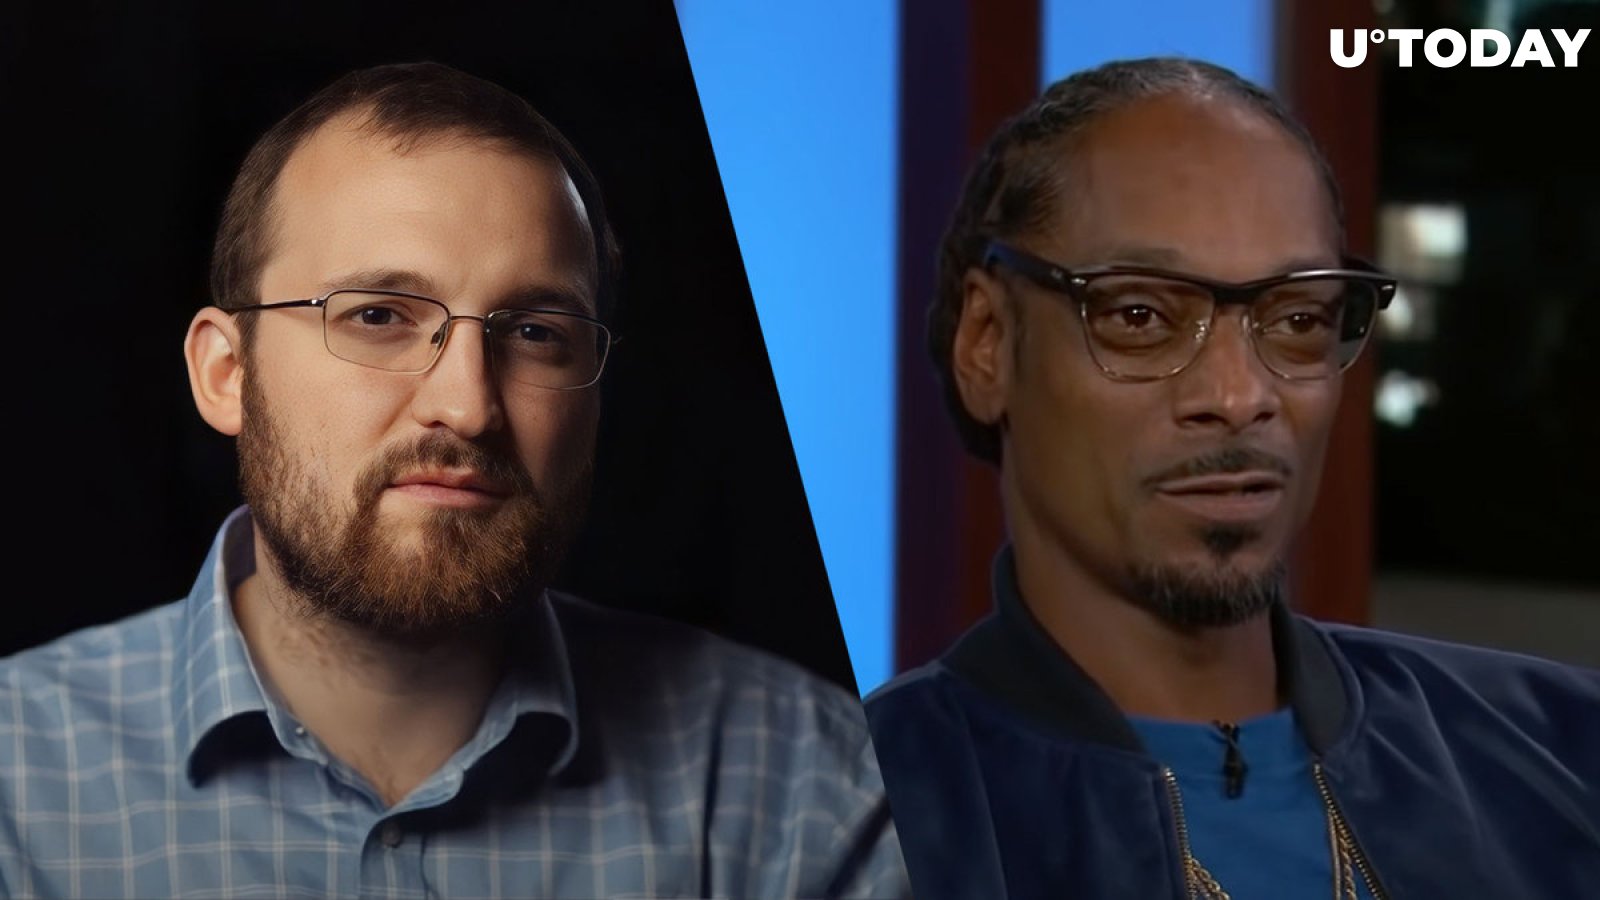 Cardano Founder's Photo with Snoop Dogg Boosts Cardano NFT Sales by 33%